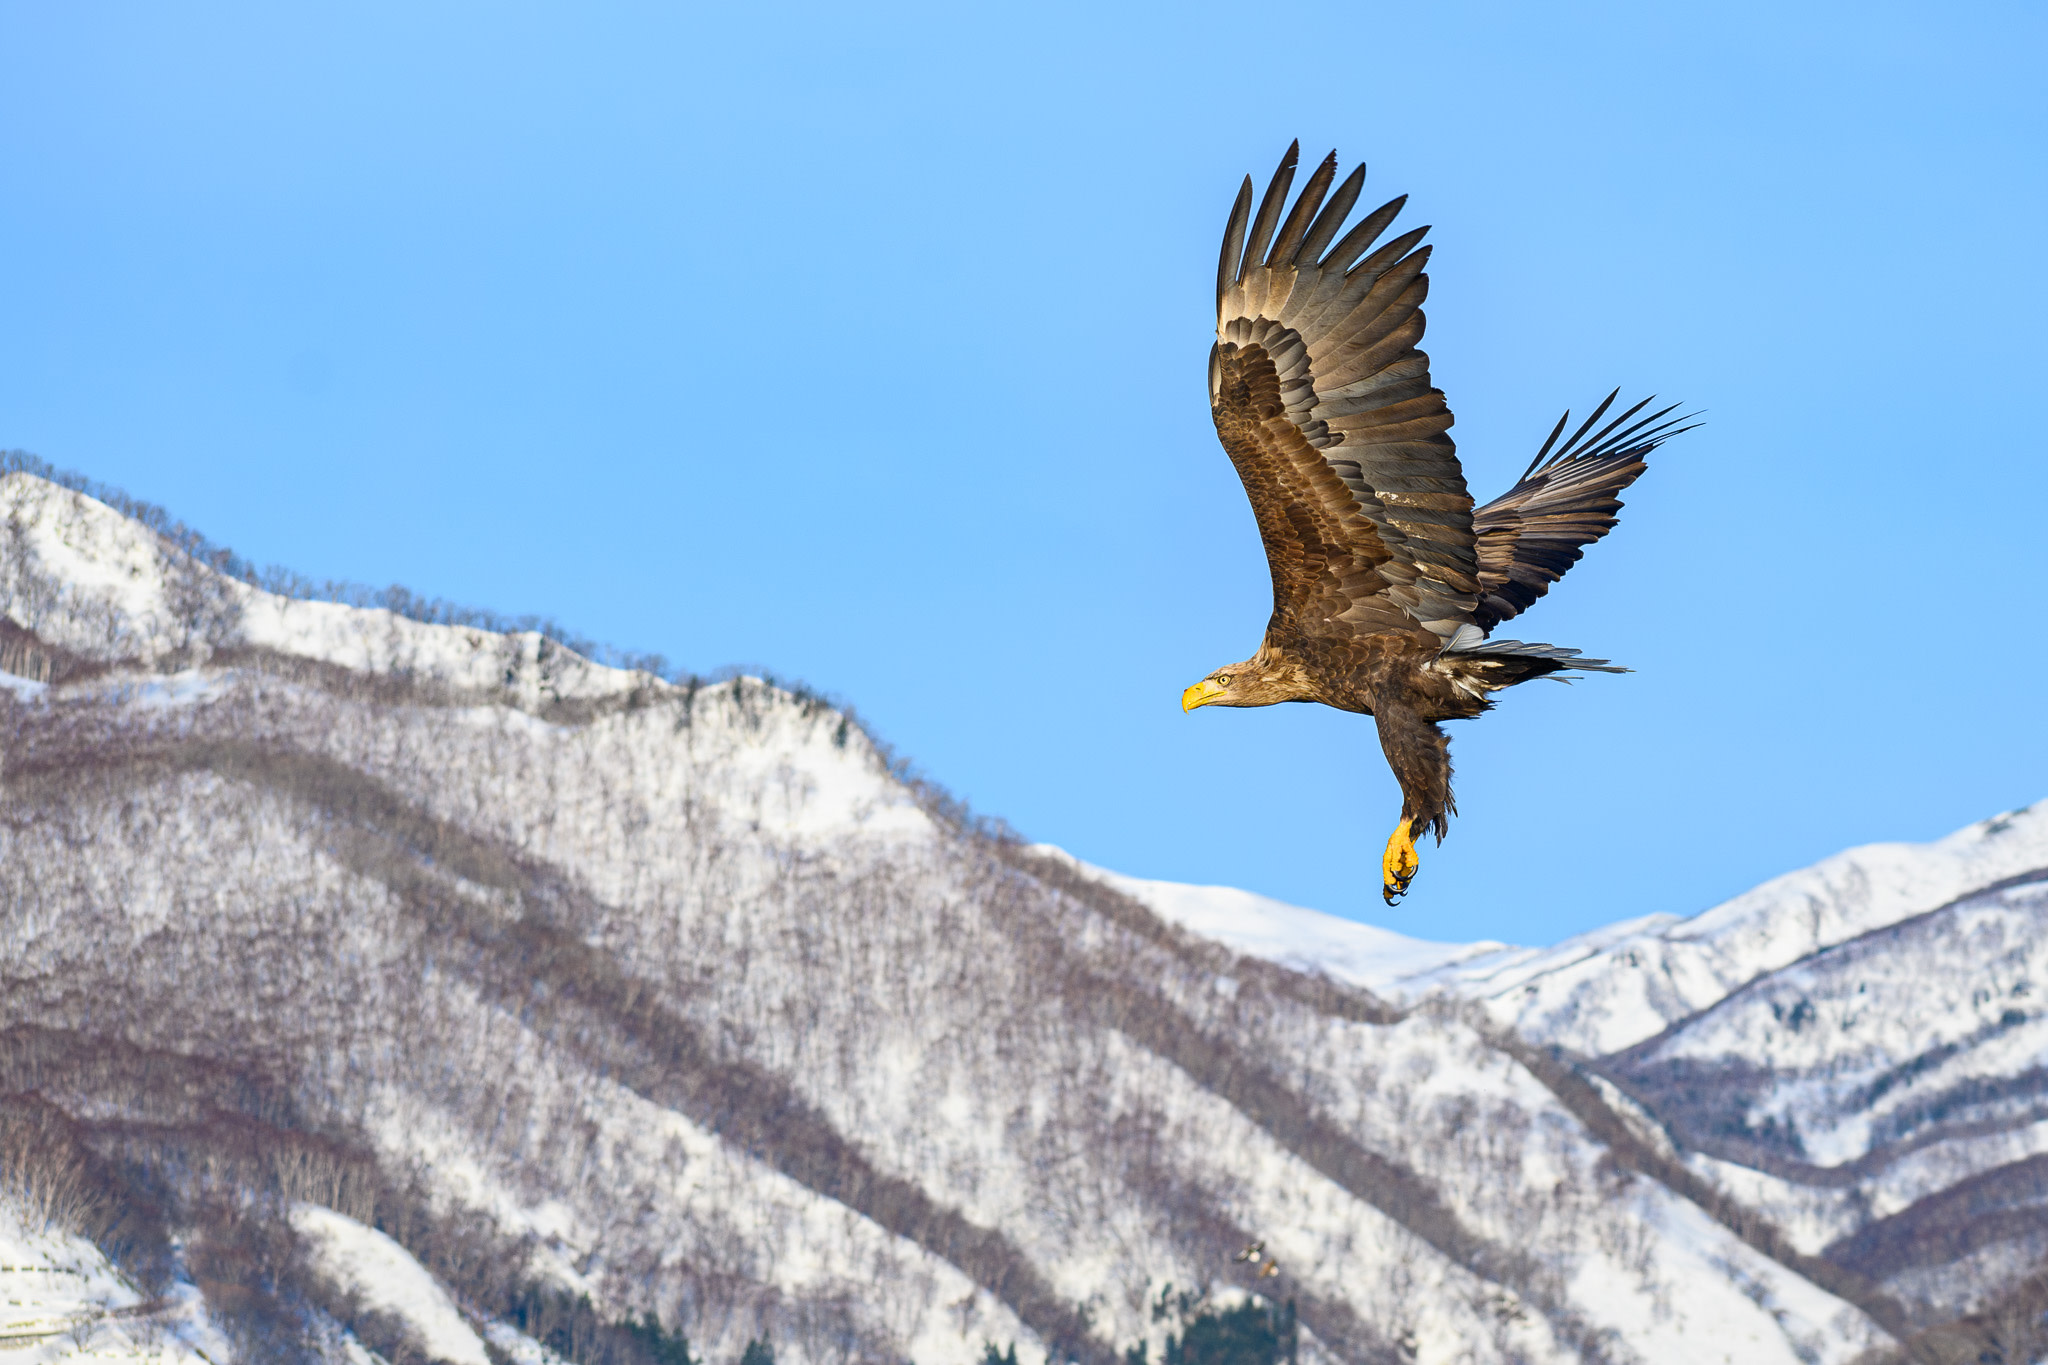 A white-tailed eagle flies in the sky, two mountain peaks in the background.